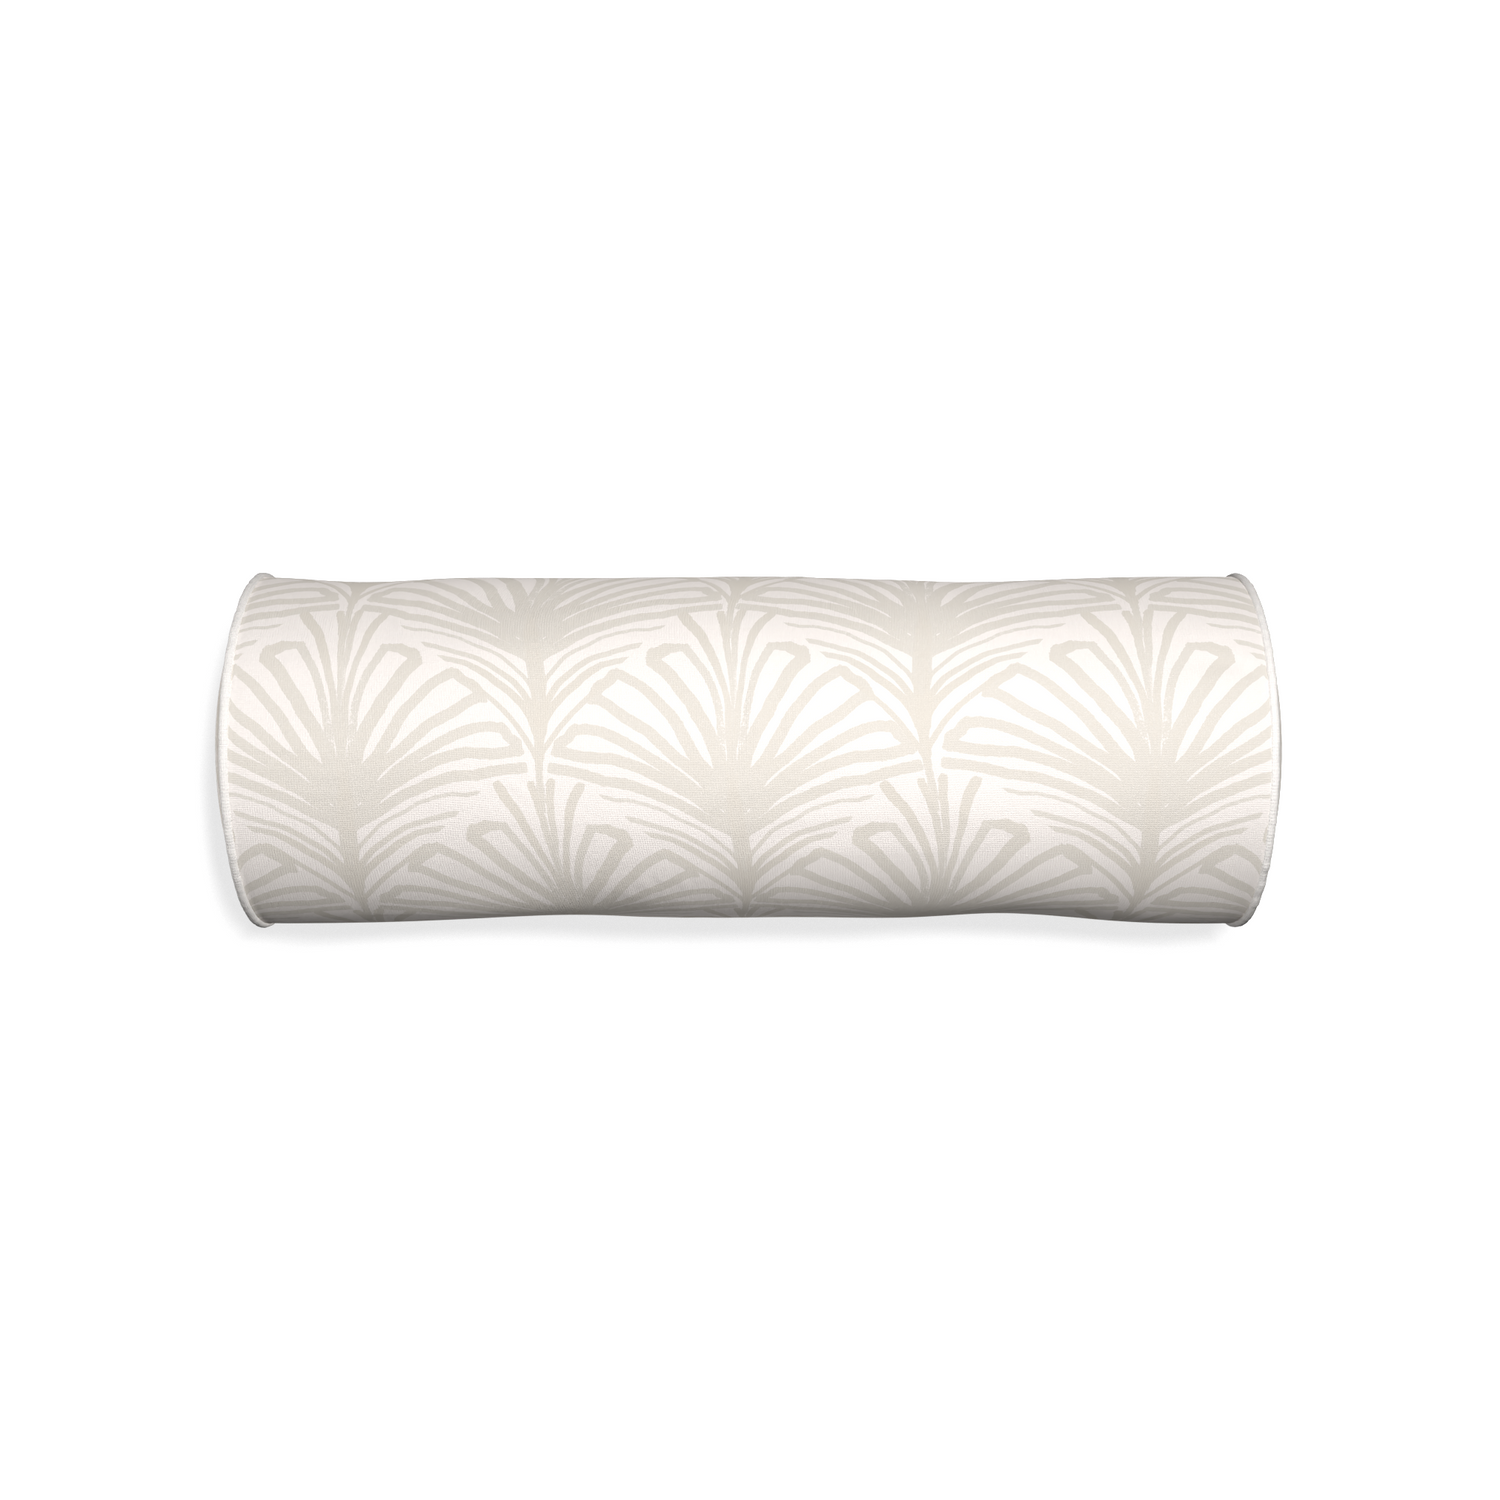 Bolster suzy sand custom beige palmpillow with snow piping on white background